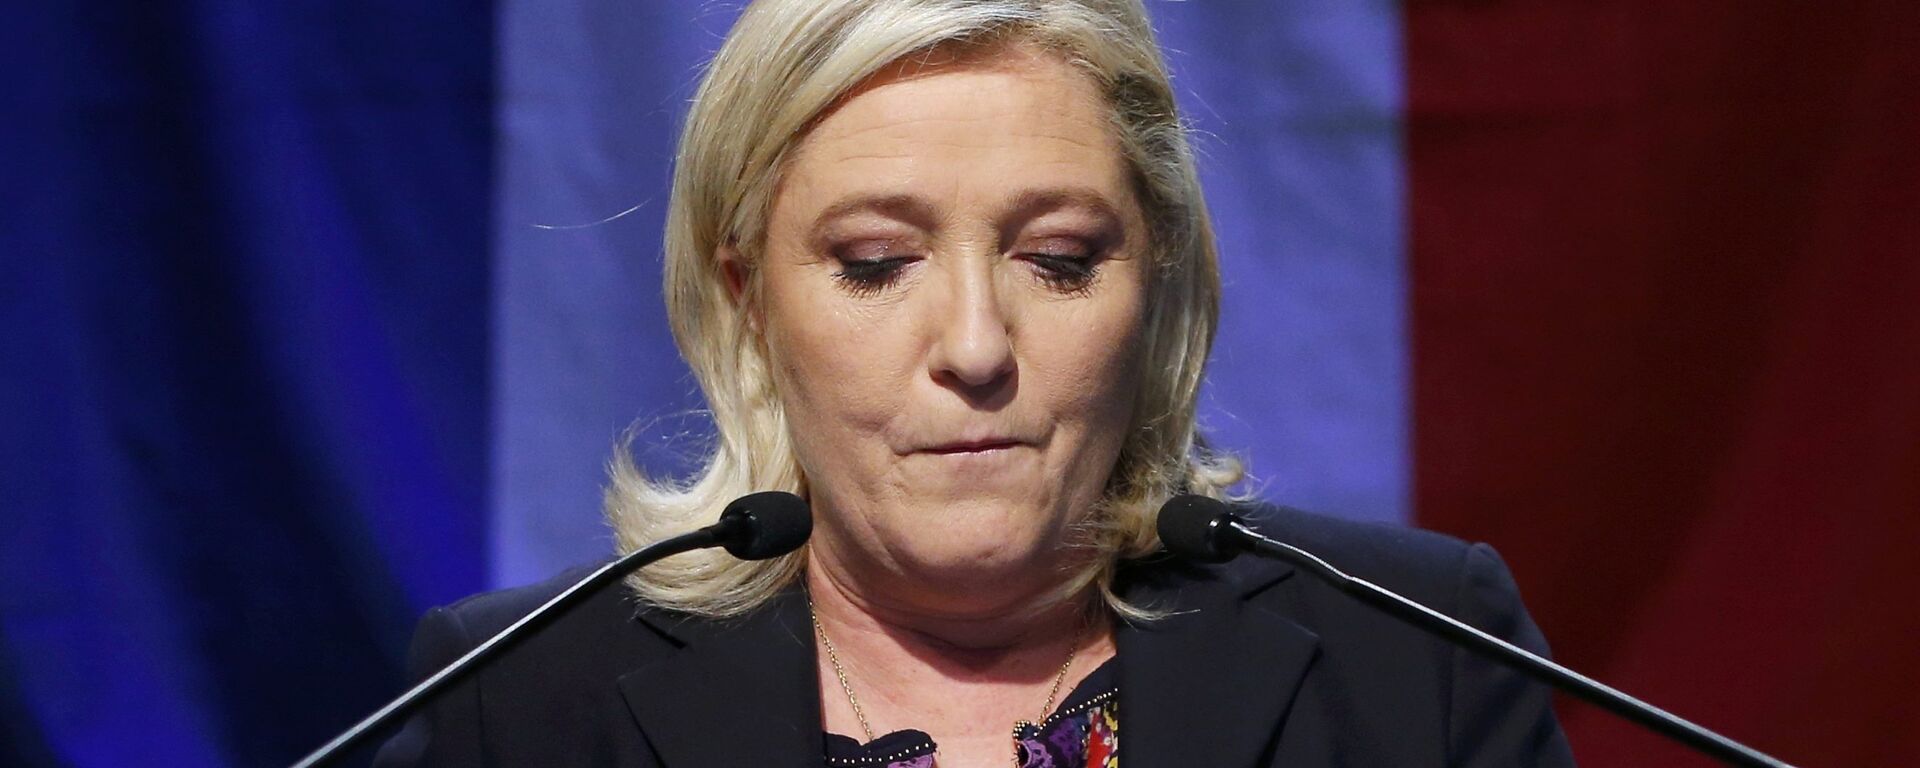 French National Front political party leader and candidate Marine Le Pen delivers a speech  - Sputnik Mundo, 1920, 27.06.2021